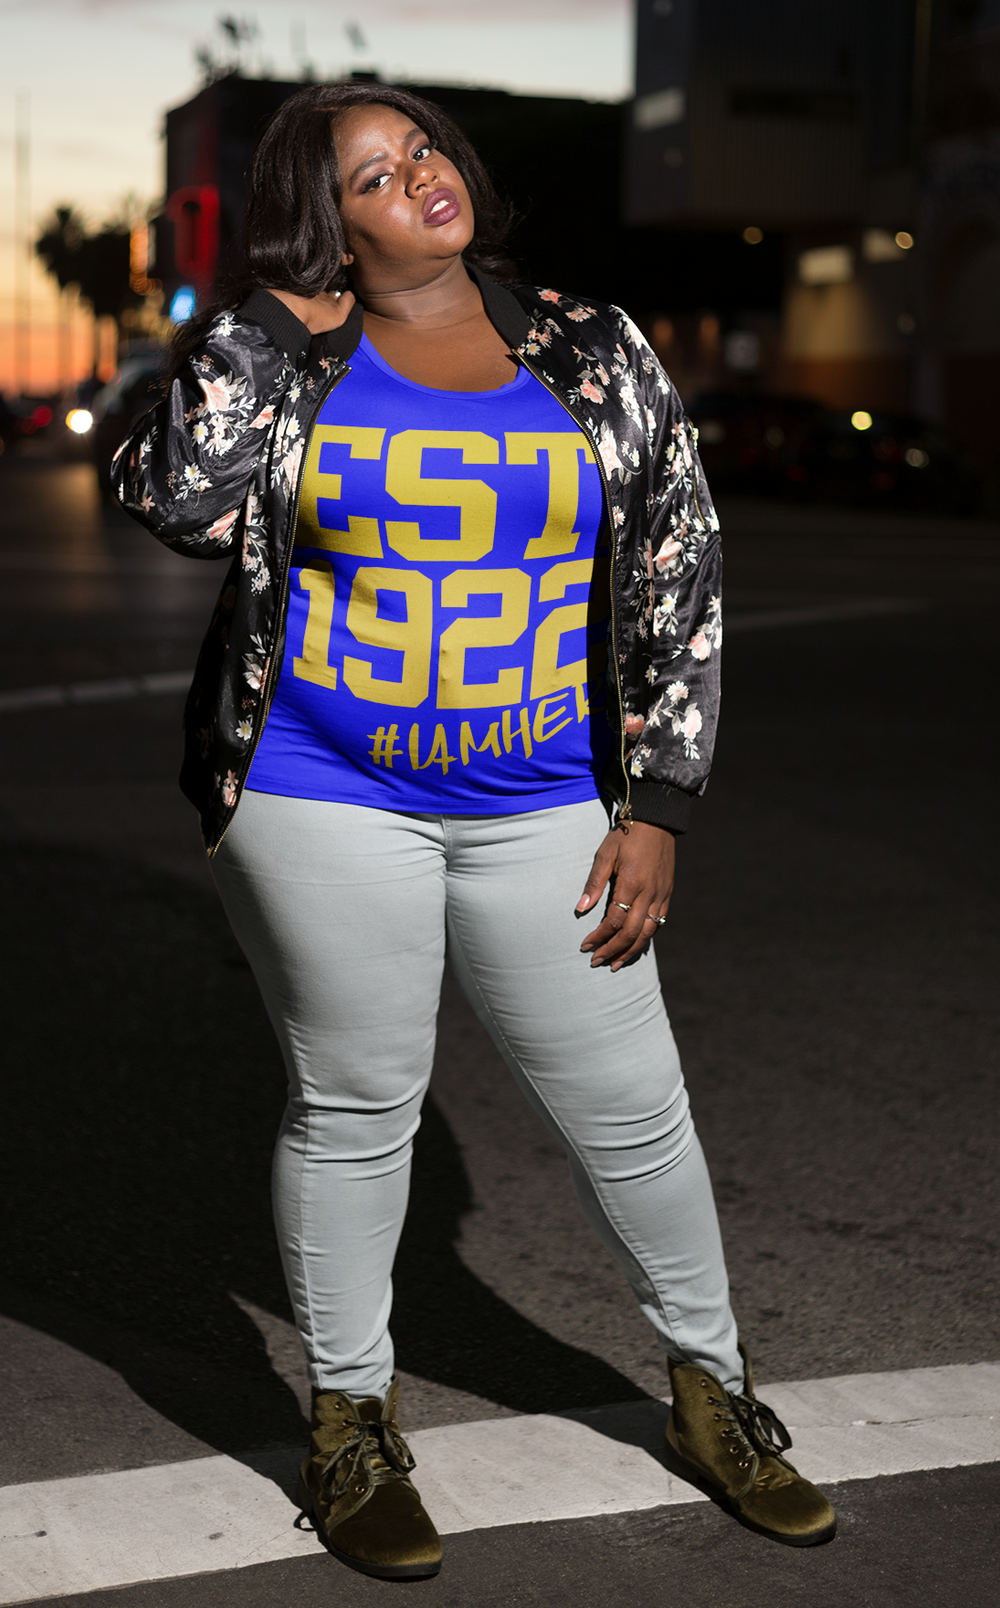 Sigma Gamma Rho Inspired - EST. 1922 - Tees for Women - I AM HER Apparel